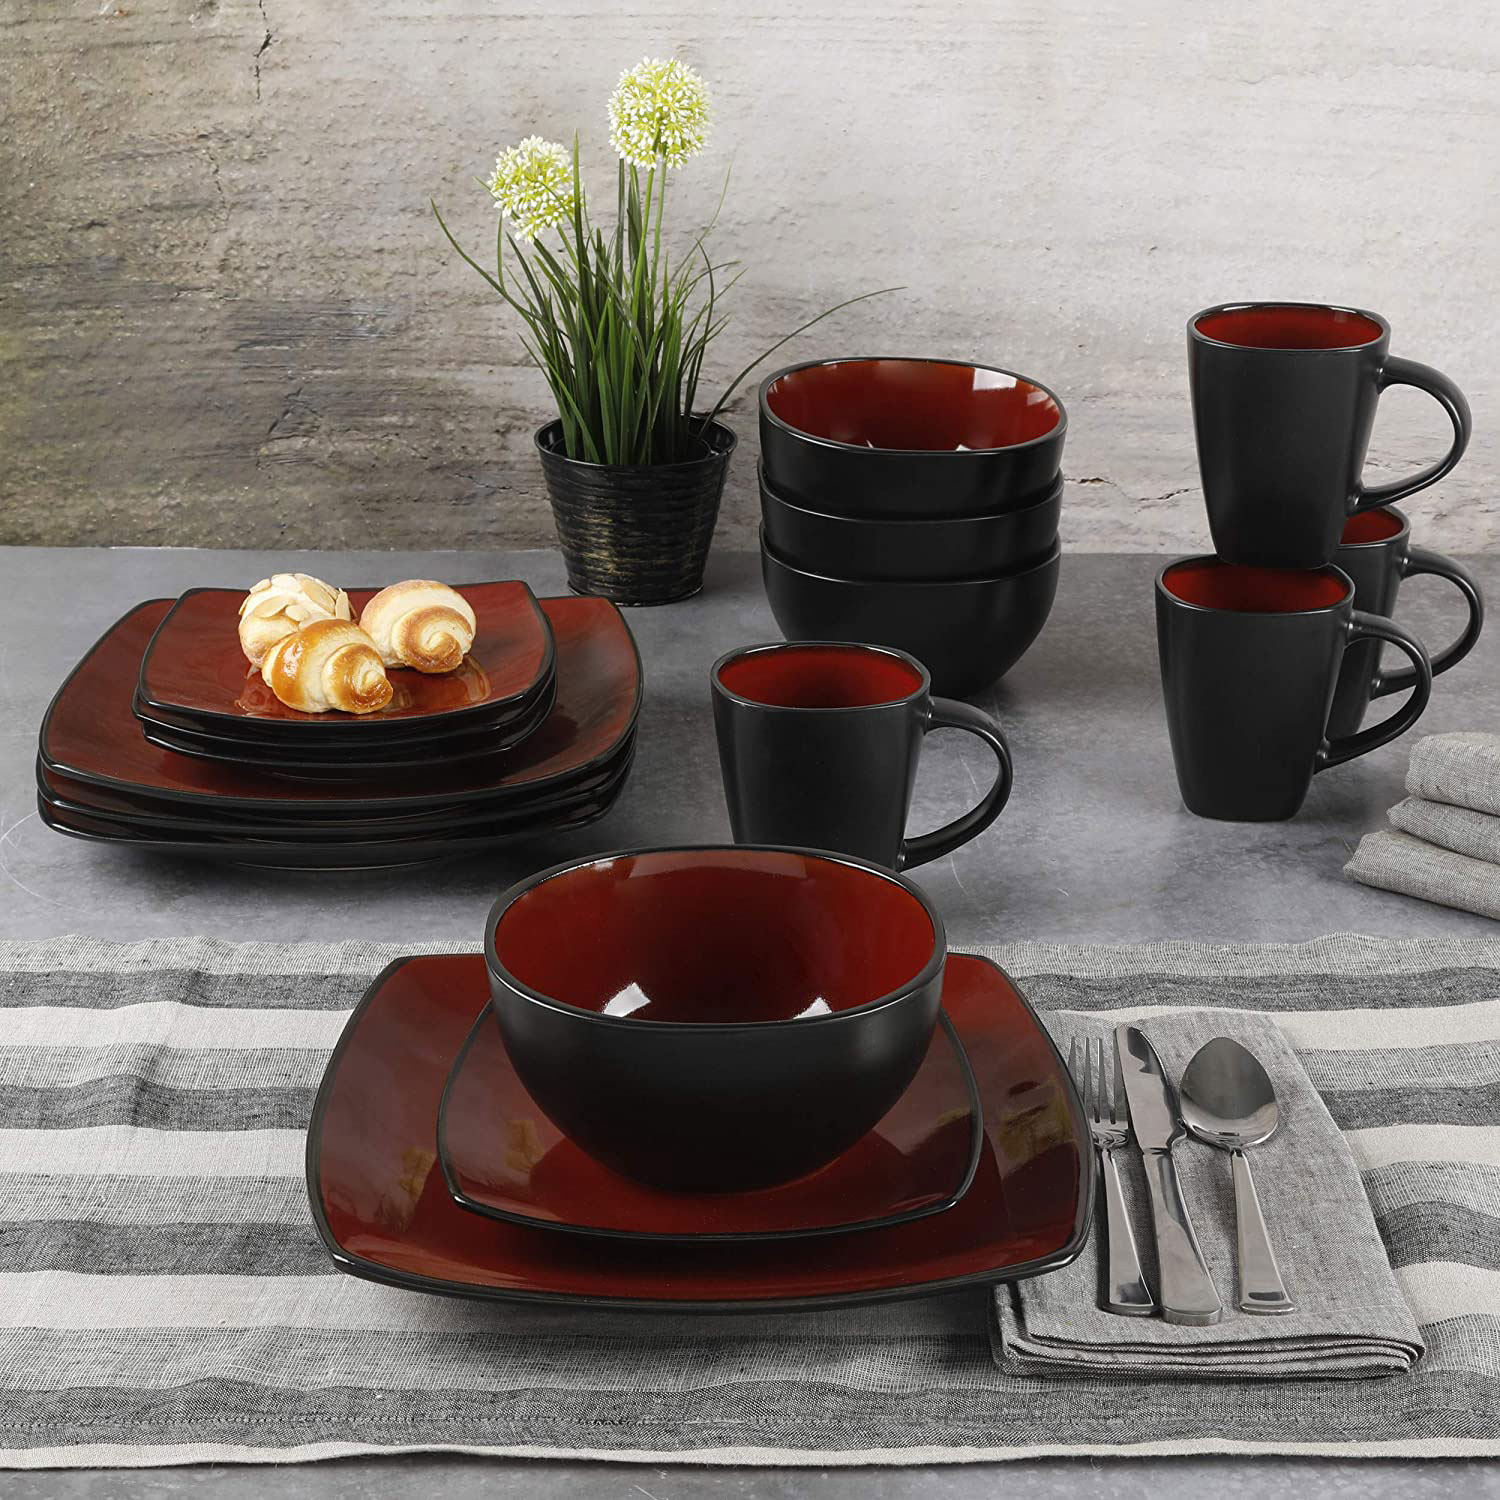 Gibson Soho Lounge Square 16-Piece Dinnerware Set - Red - image 2 of 11